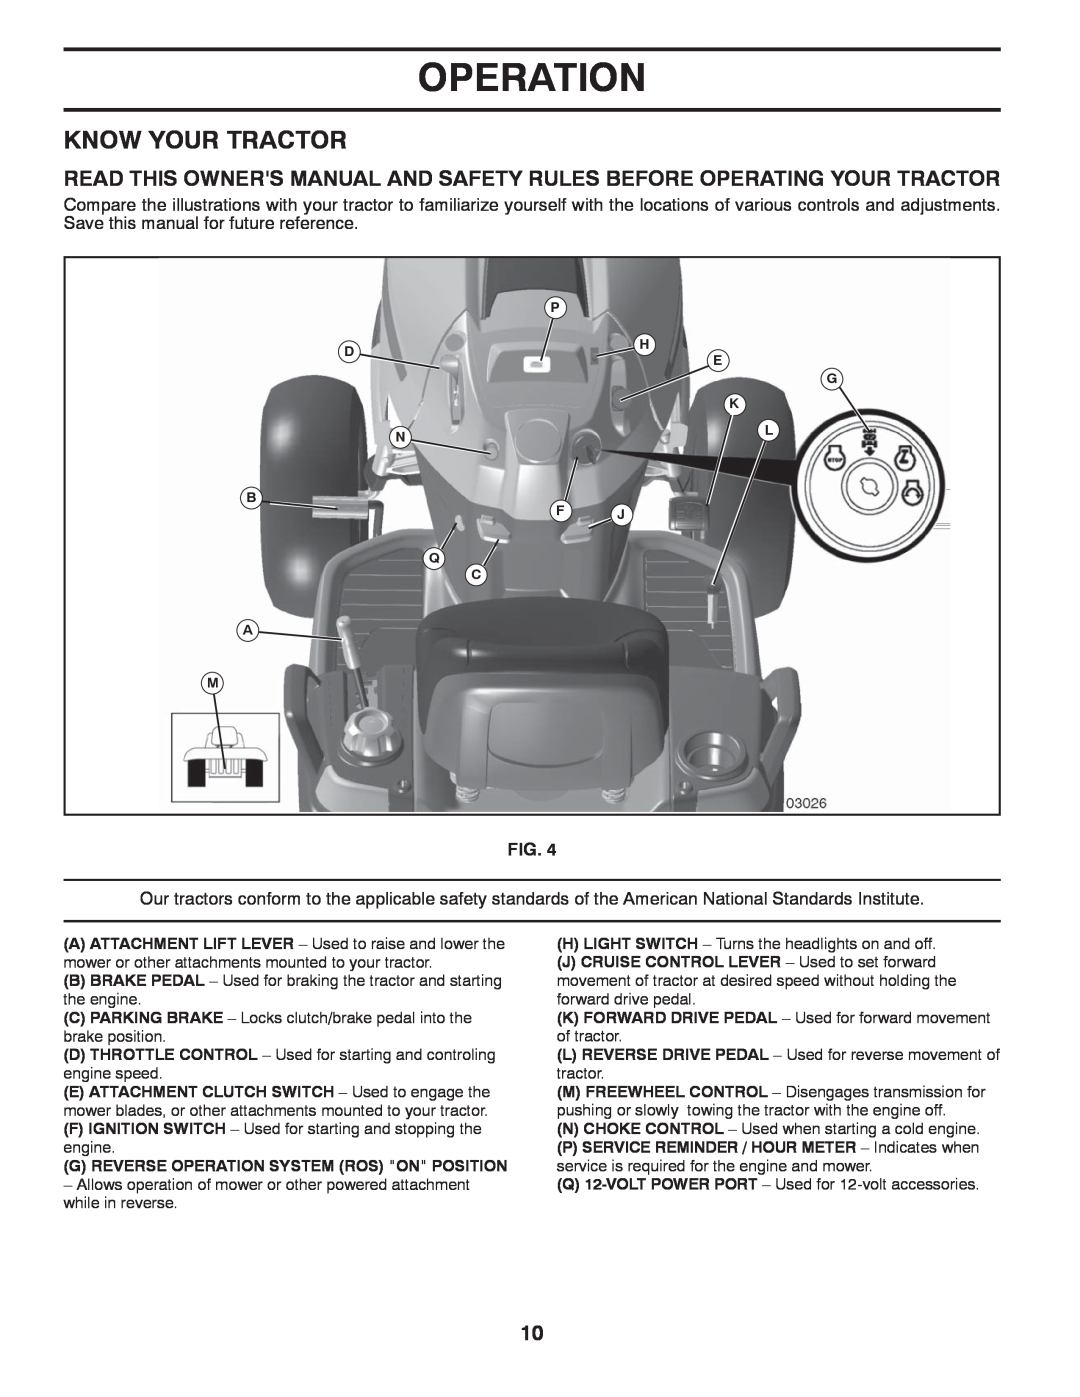 Husqvarna YTH2454 owner manual Know Your Tractor, Operation, Fig 